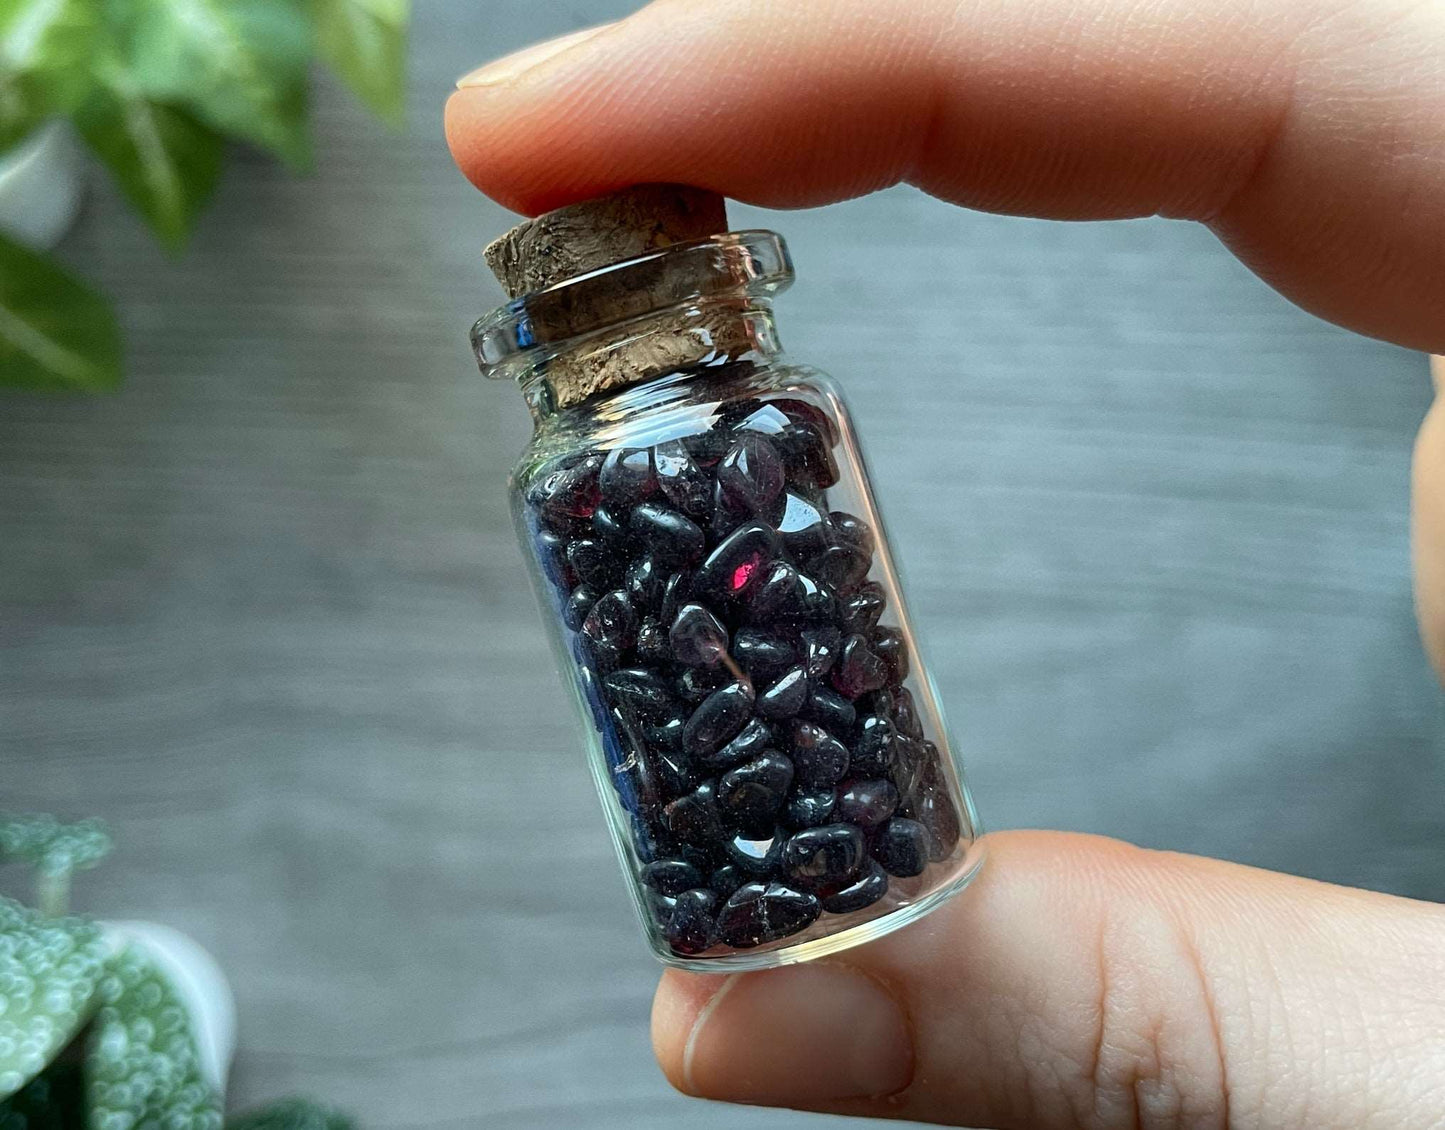 Pictured is a small glass vial with a cork stopper. Inside the jar are garnet chips.